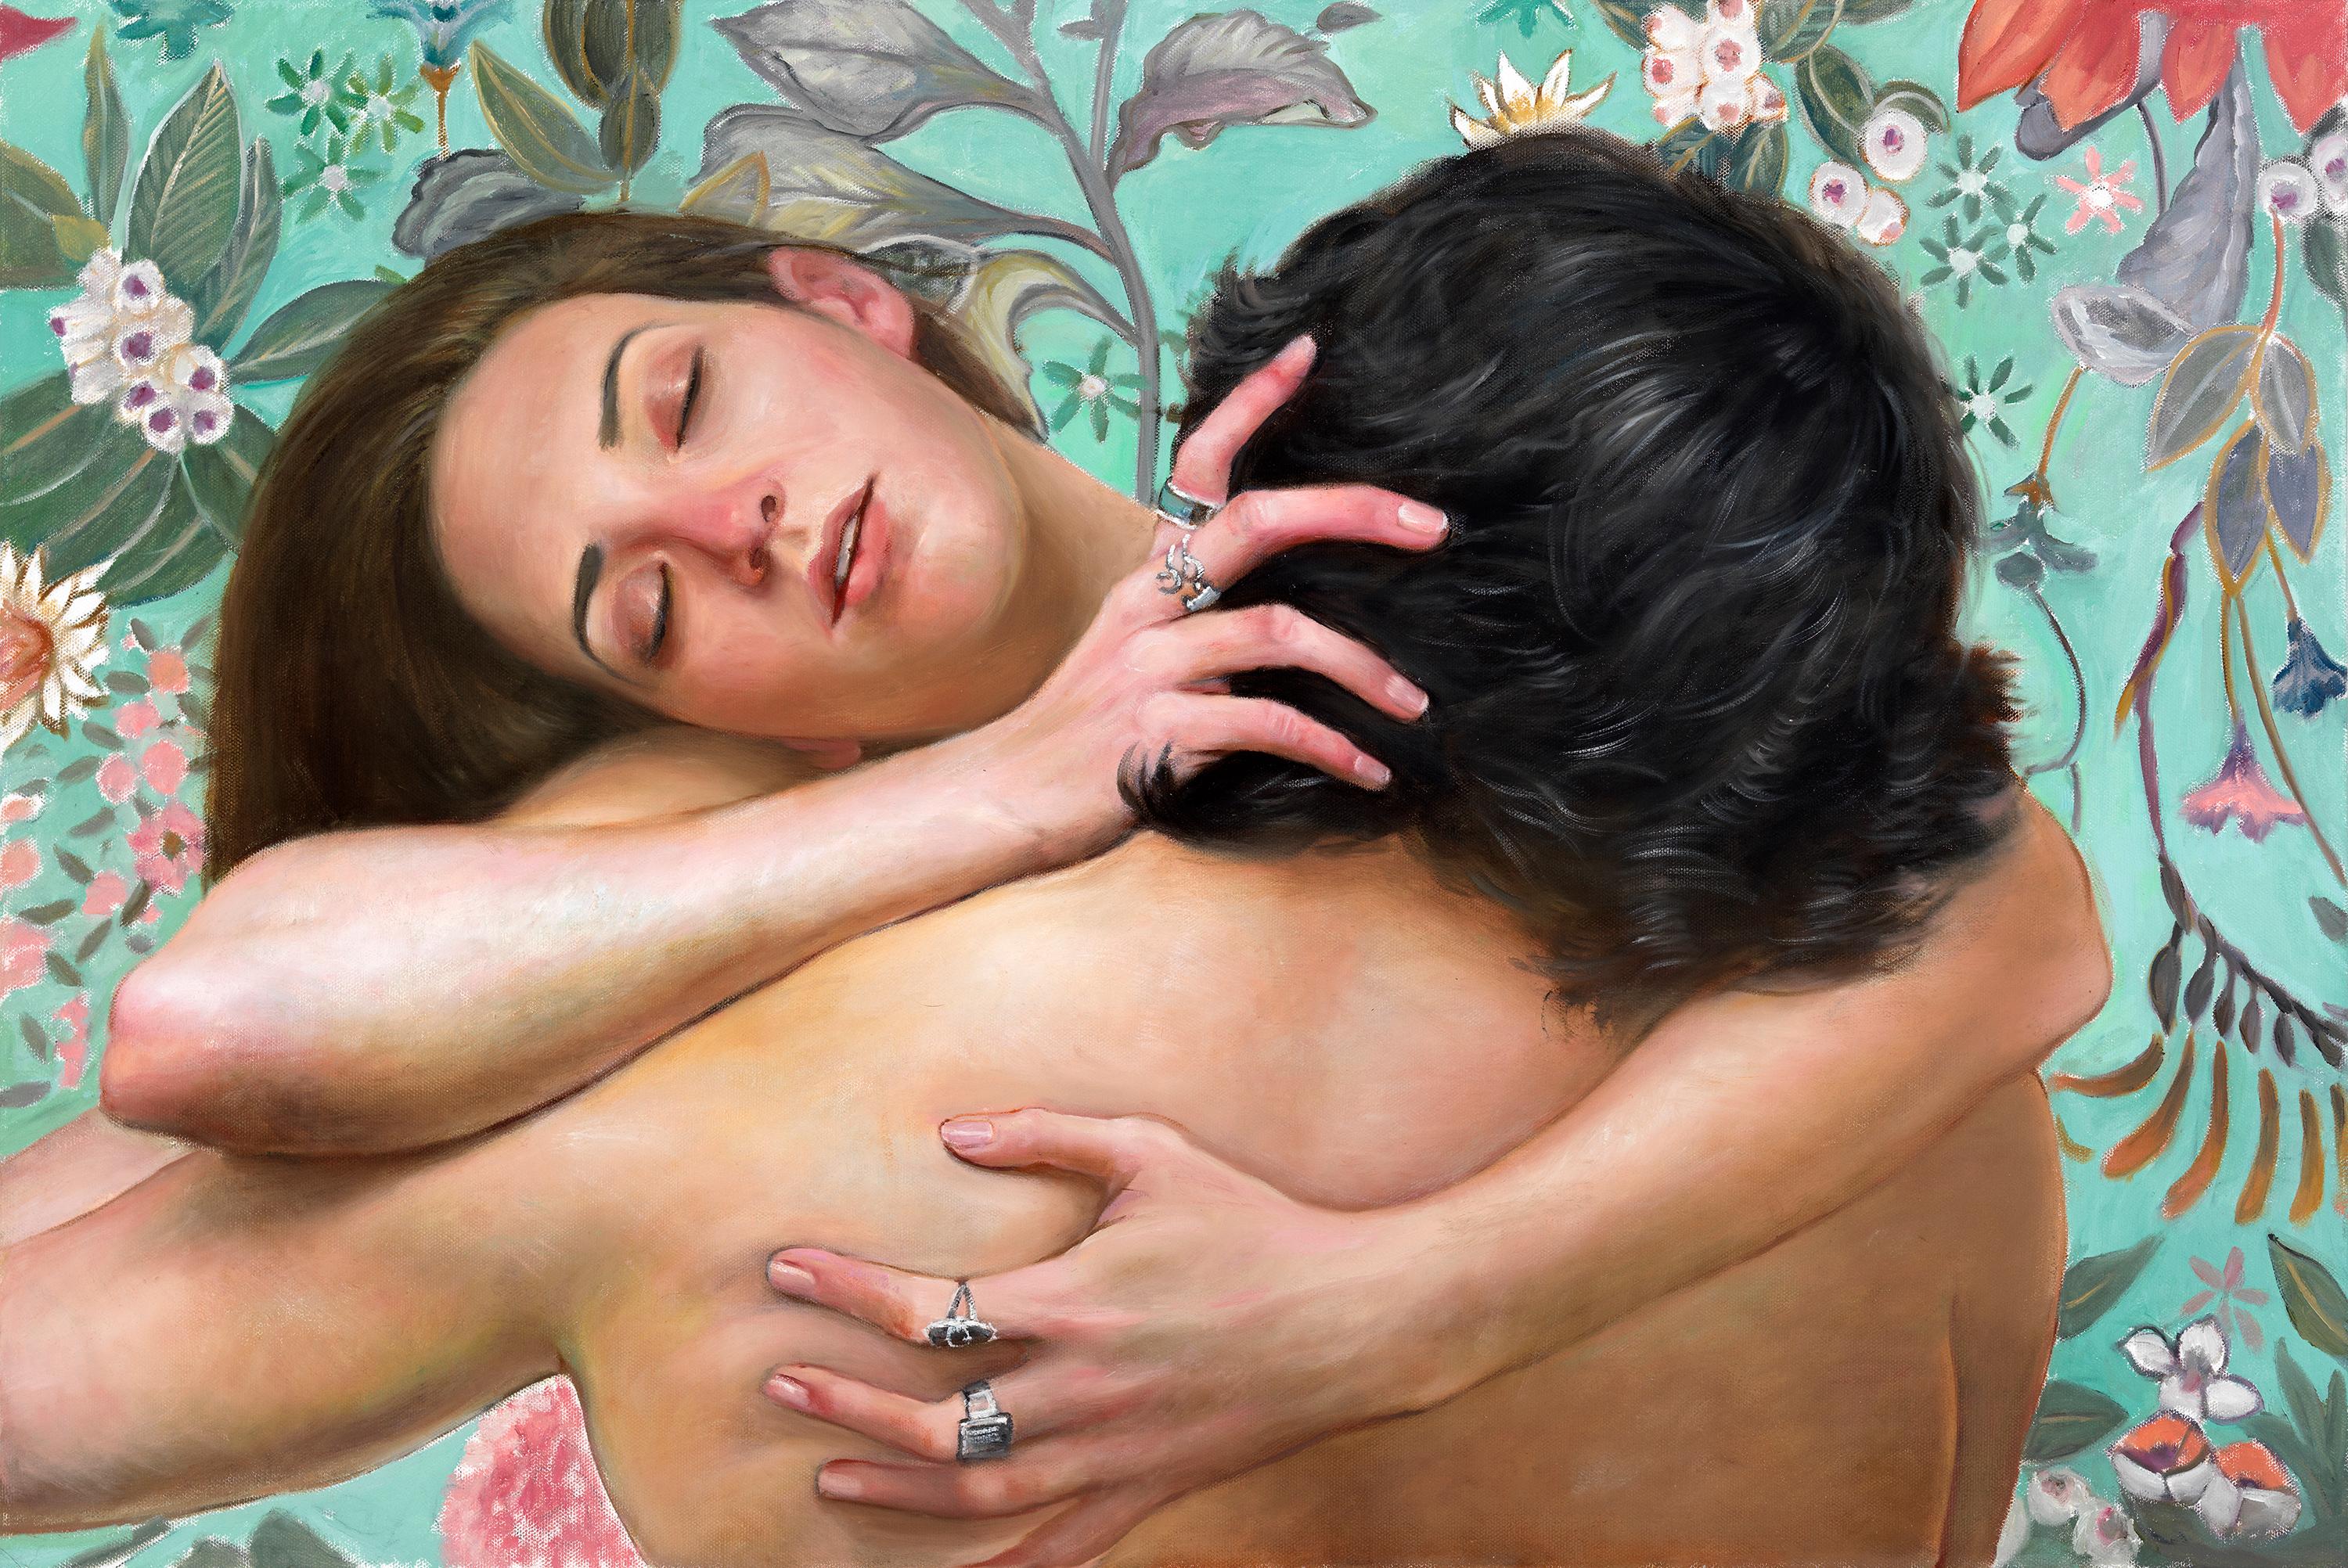 Bruno Surdo Nude Painting - Connected Souls - Couple Embracing, Floral Background, Original Oil Painting